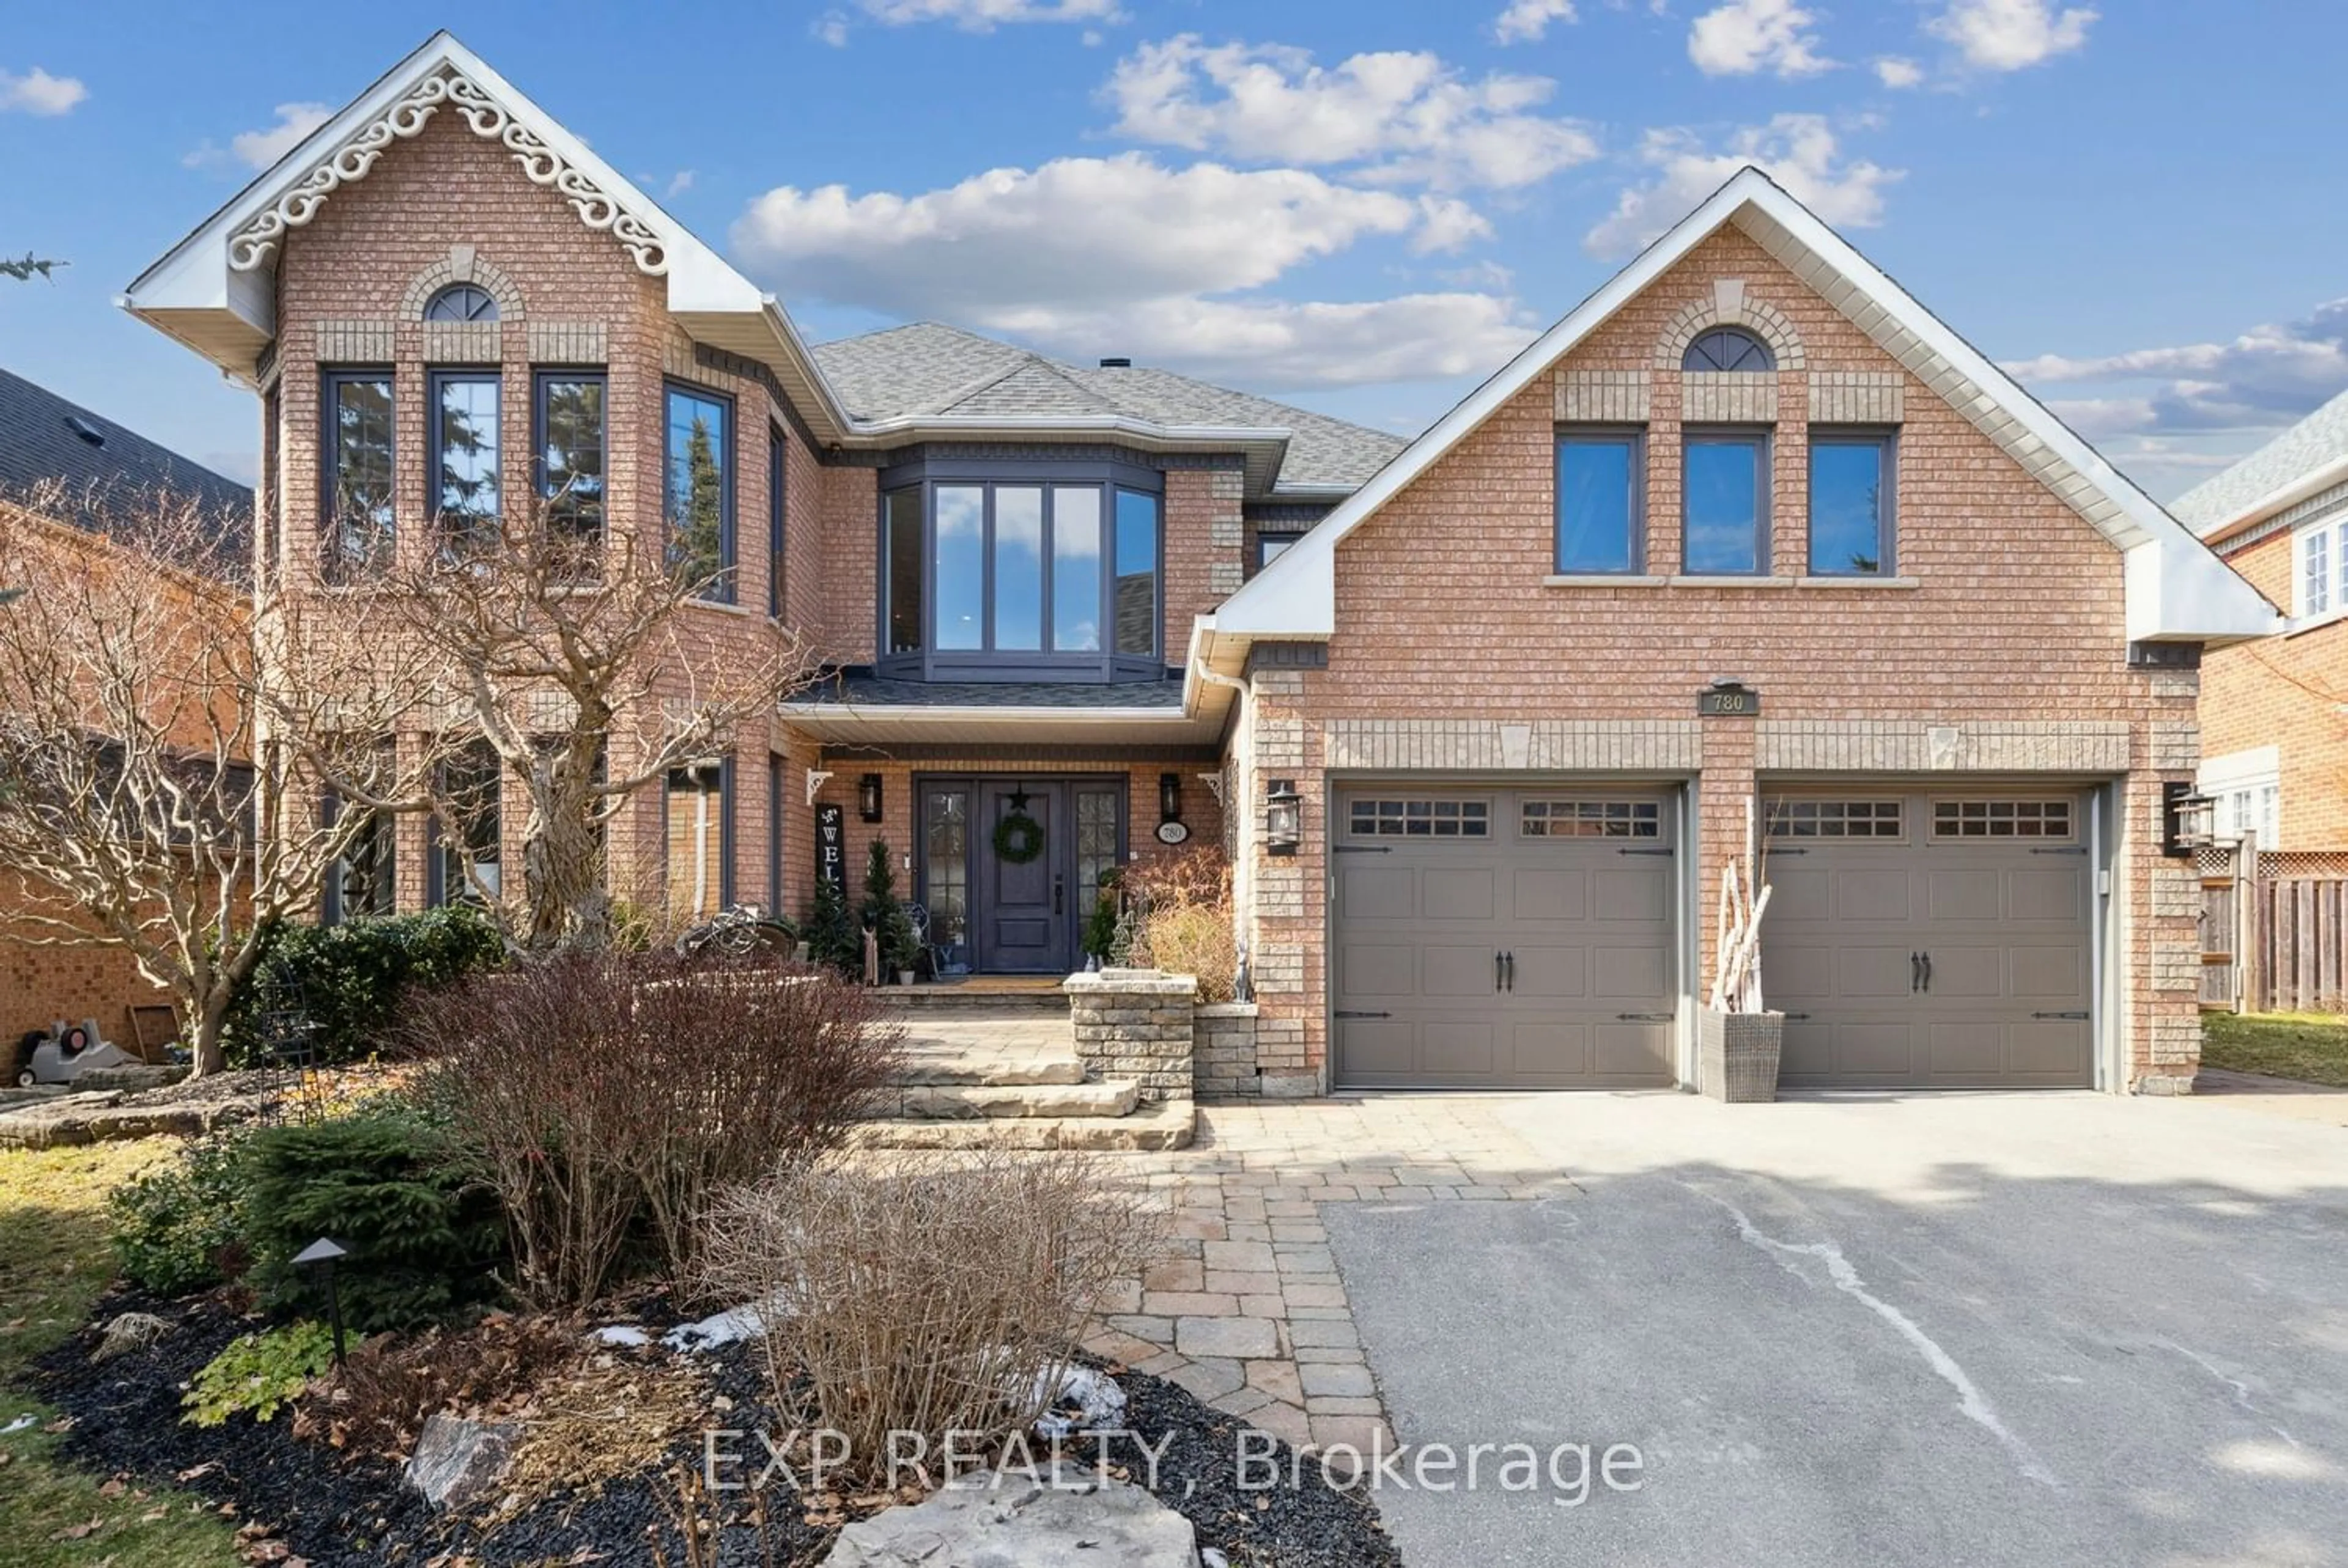 Home with brick exterior material for 780 Foxcroft Blvd, Newmarket Ontario L3X 1N1